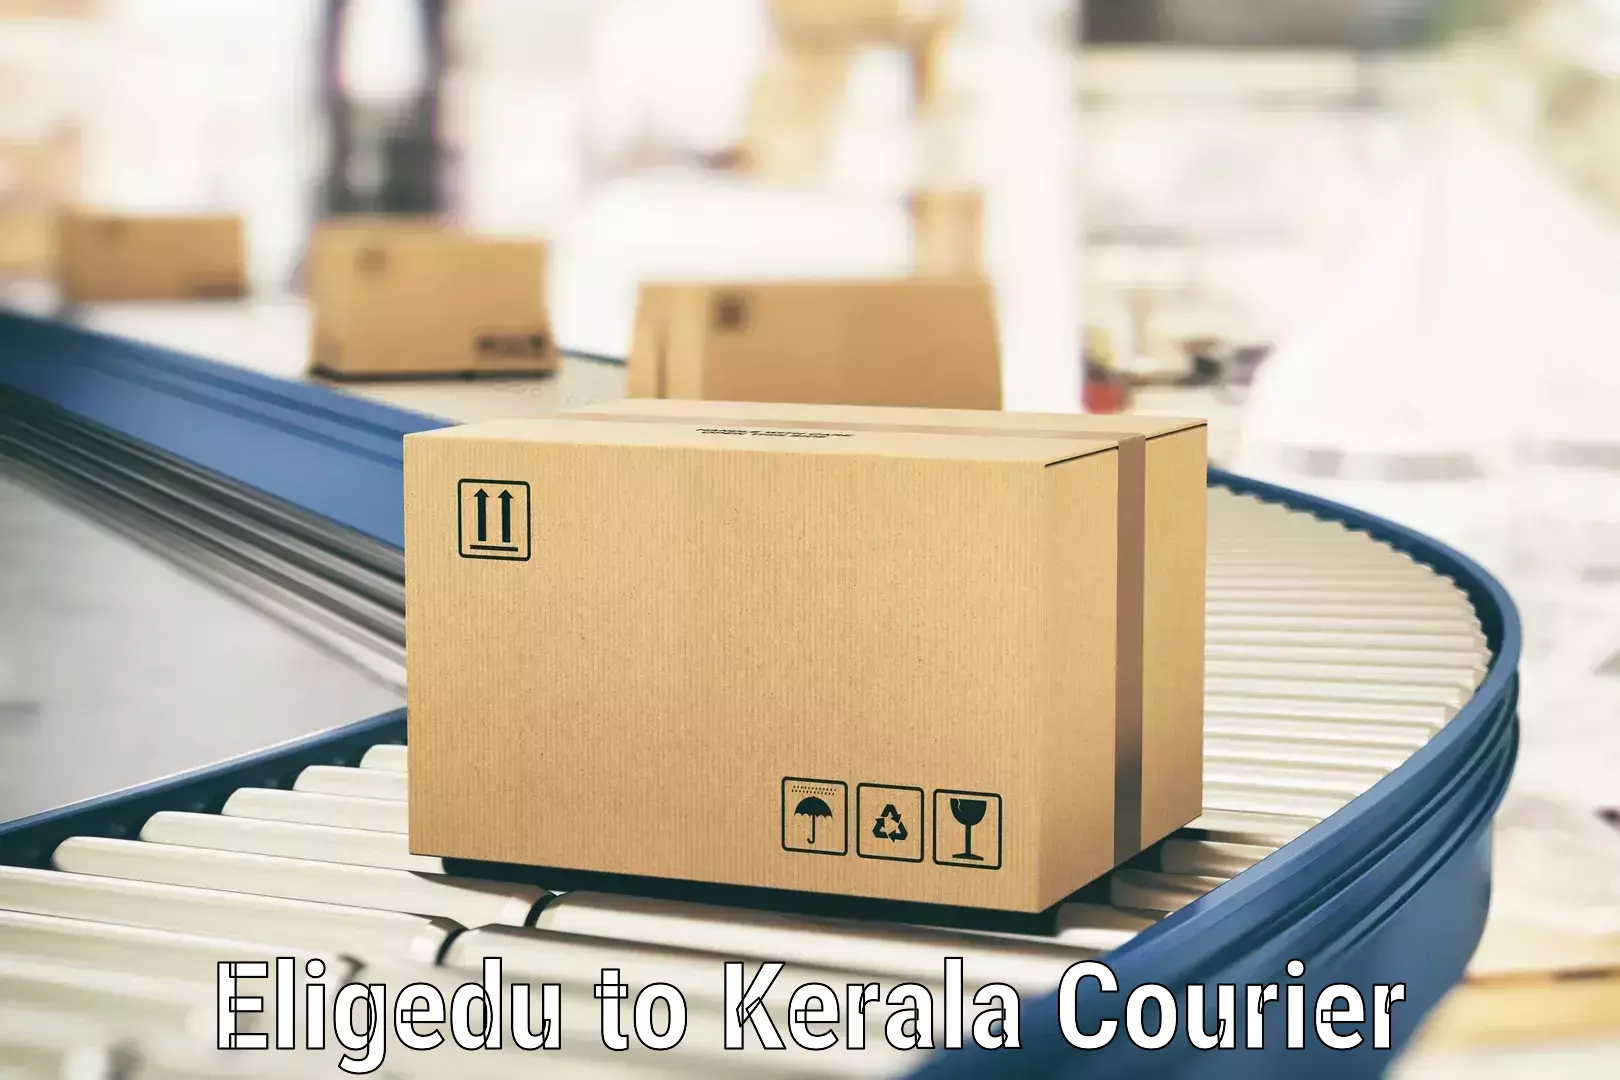 Business delivery service in Eligedu to Kochi